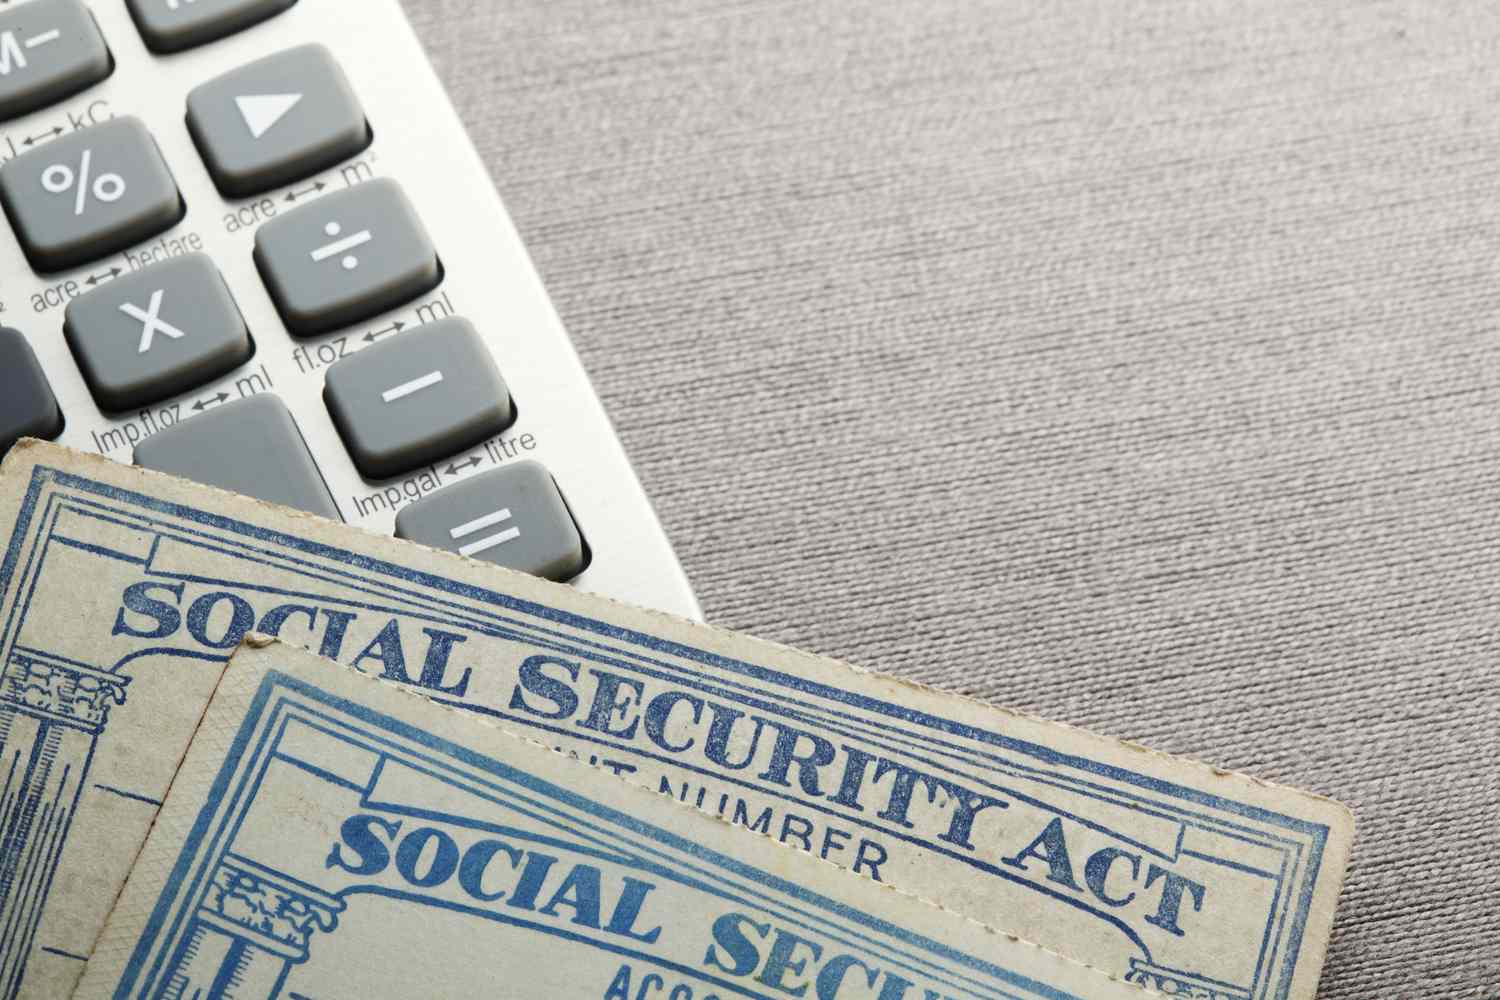 Breaking News: Big Changes in Social Security Fix Overpayment Woes for Many